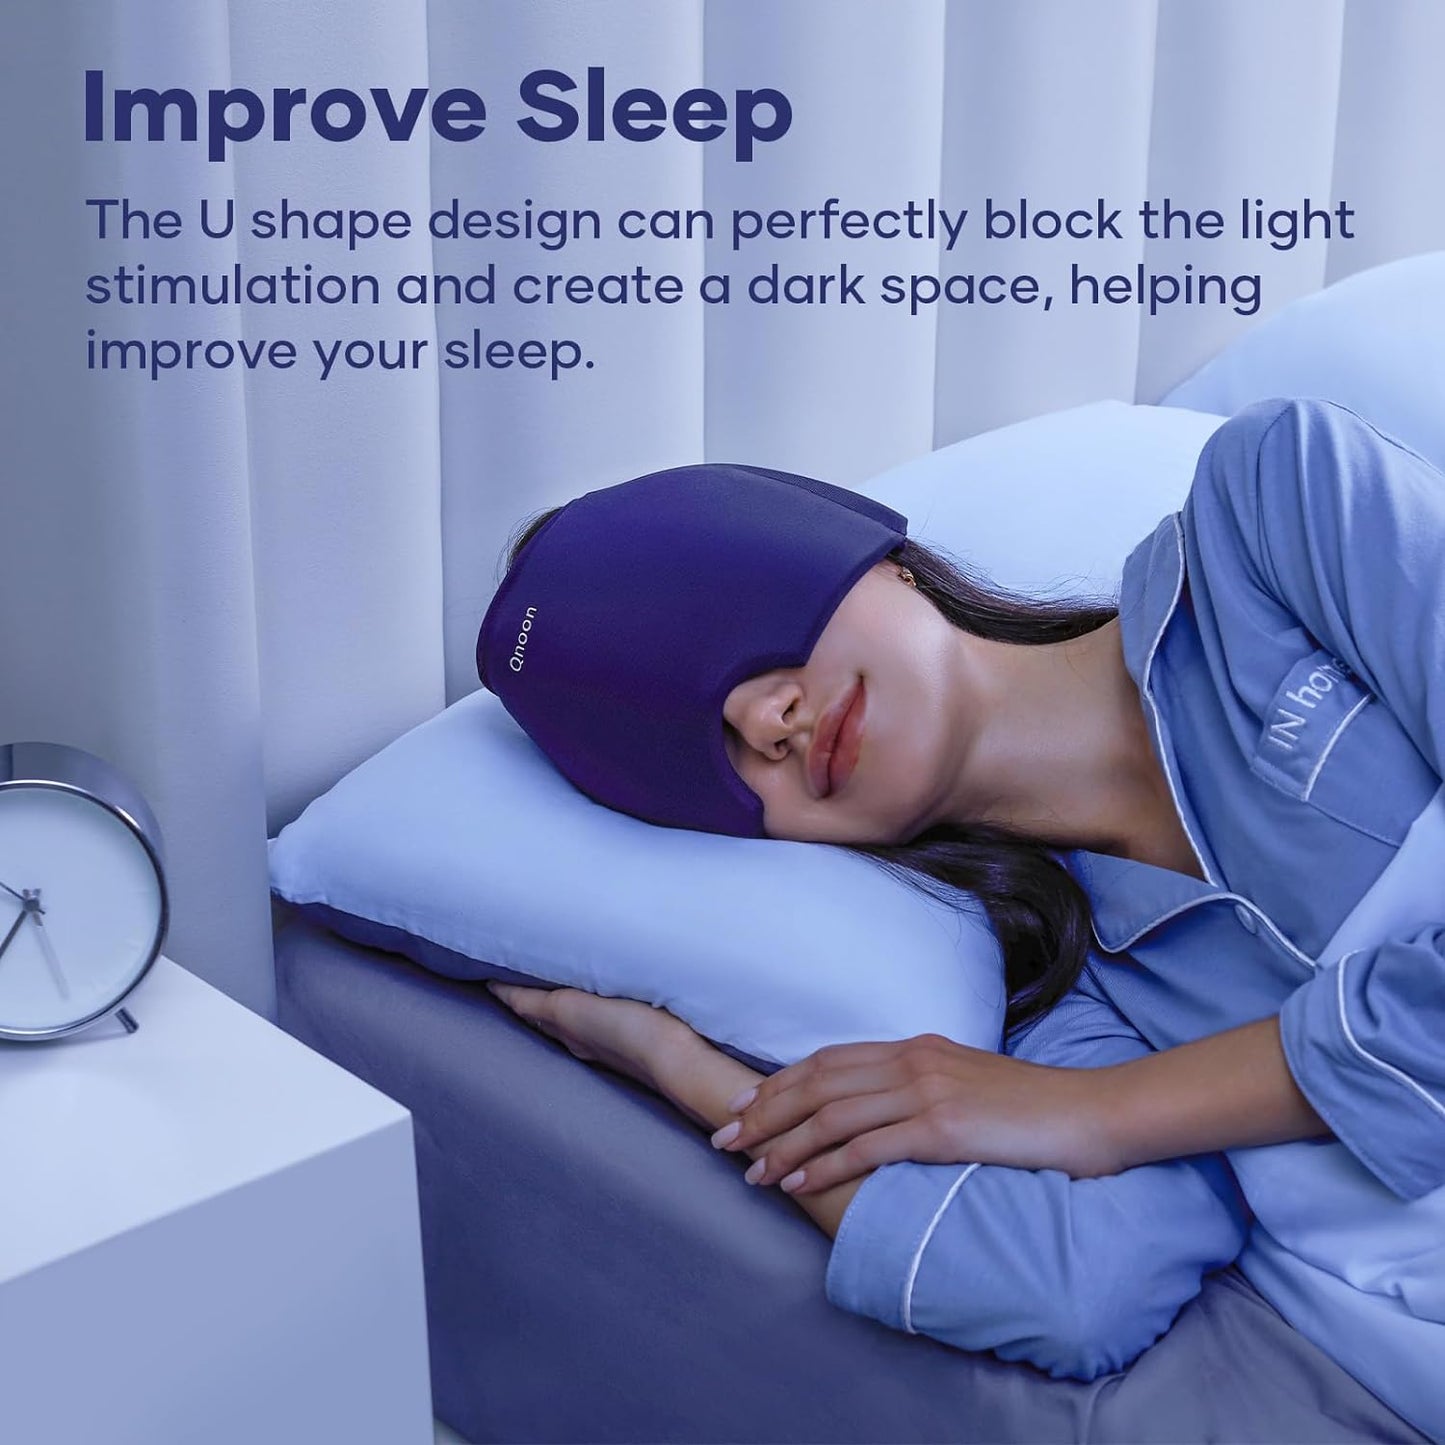 Chill Out  Migraines and sleep: Premium Headache and sleep  Relief Cap with Odorless Ice Pack - Reusable, Adjustable, and Stress-Busting Hot/Cold Gel Hat